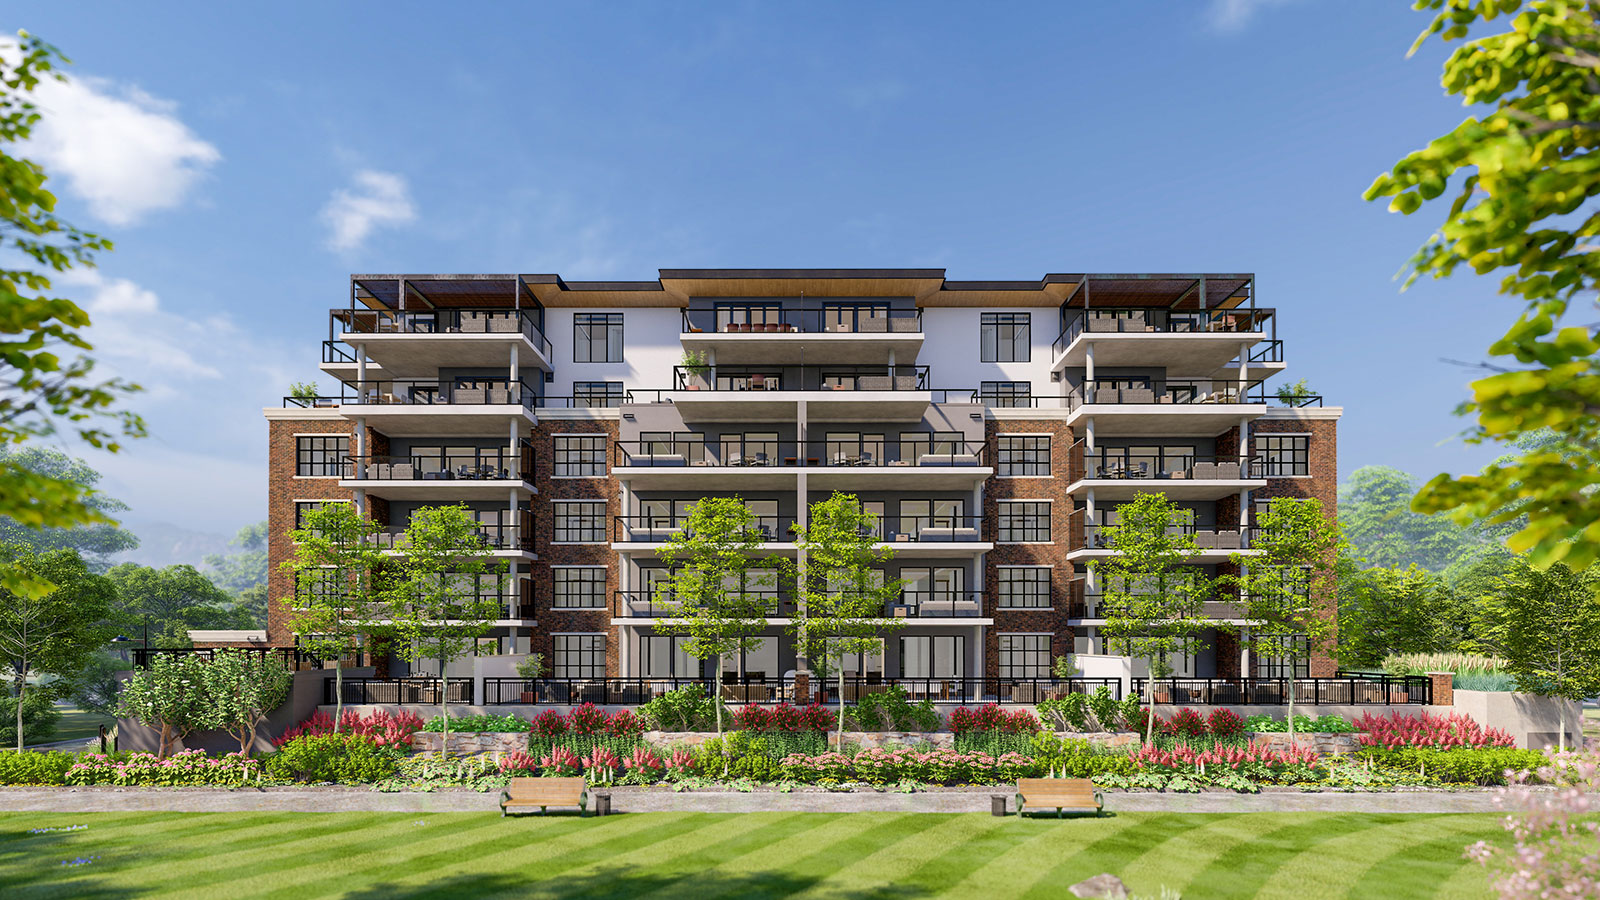 Nature surrounds you at 450 Parc. Exciting new luxury development in Kelowna